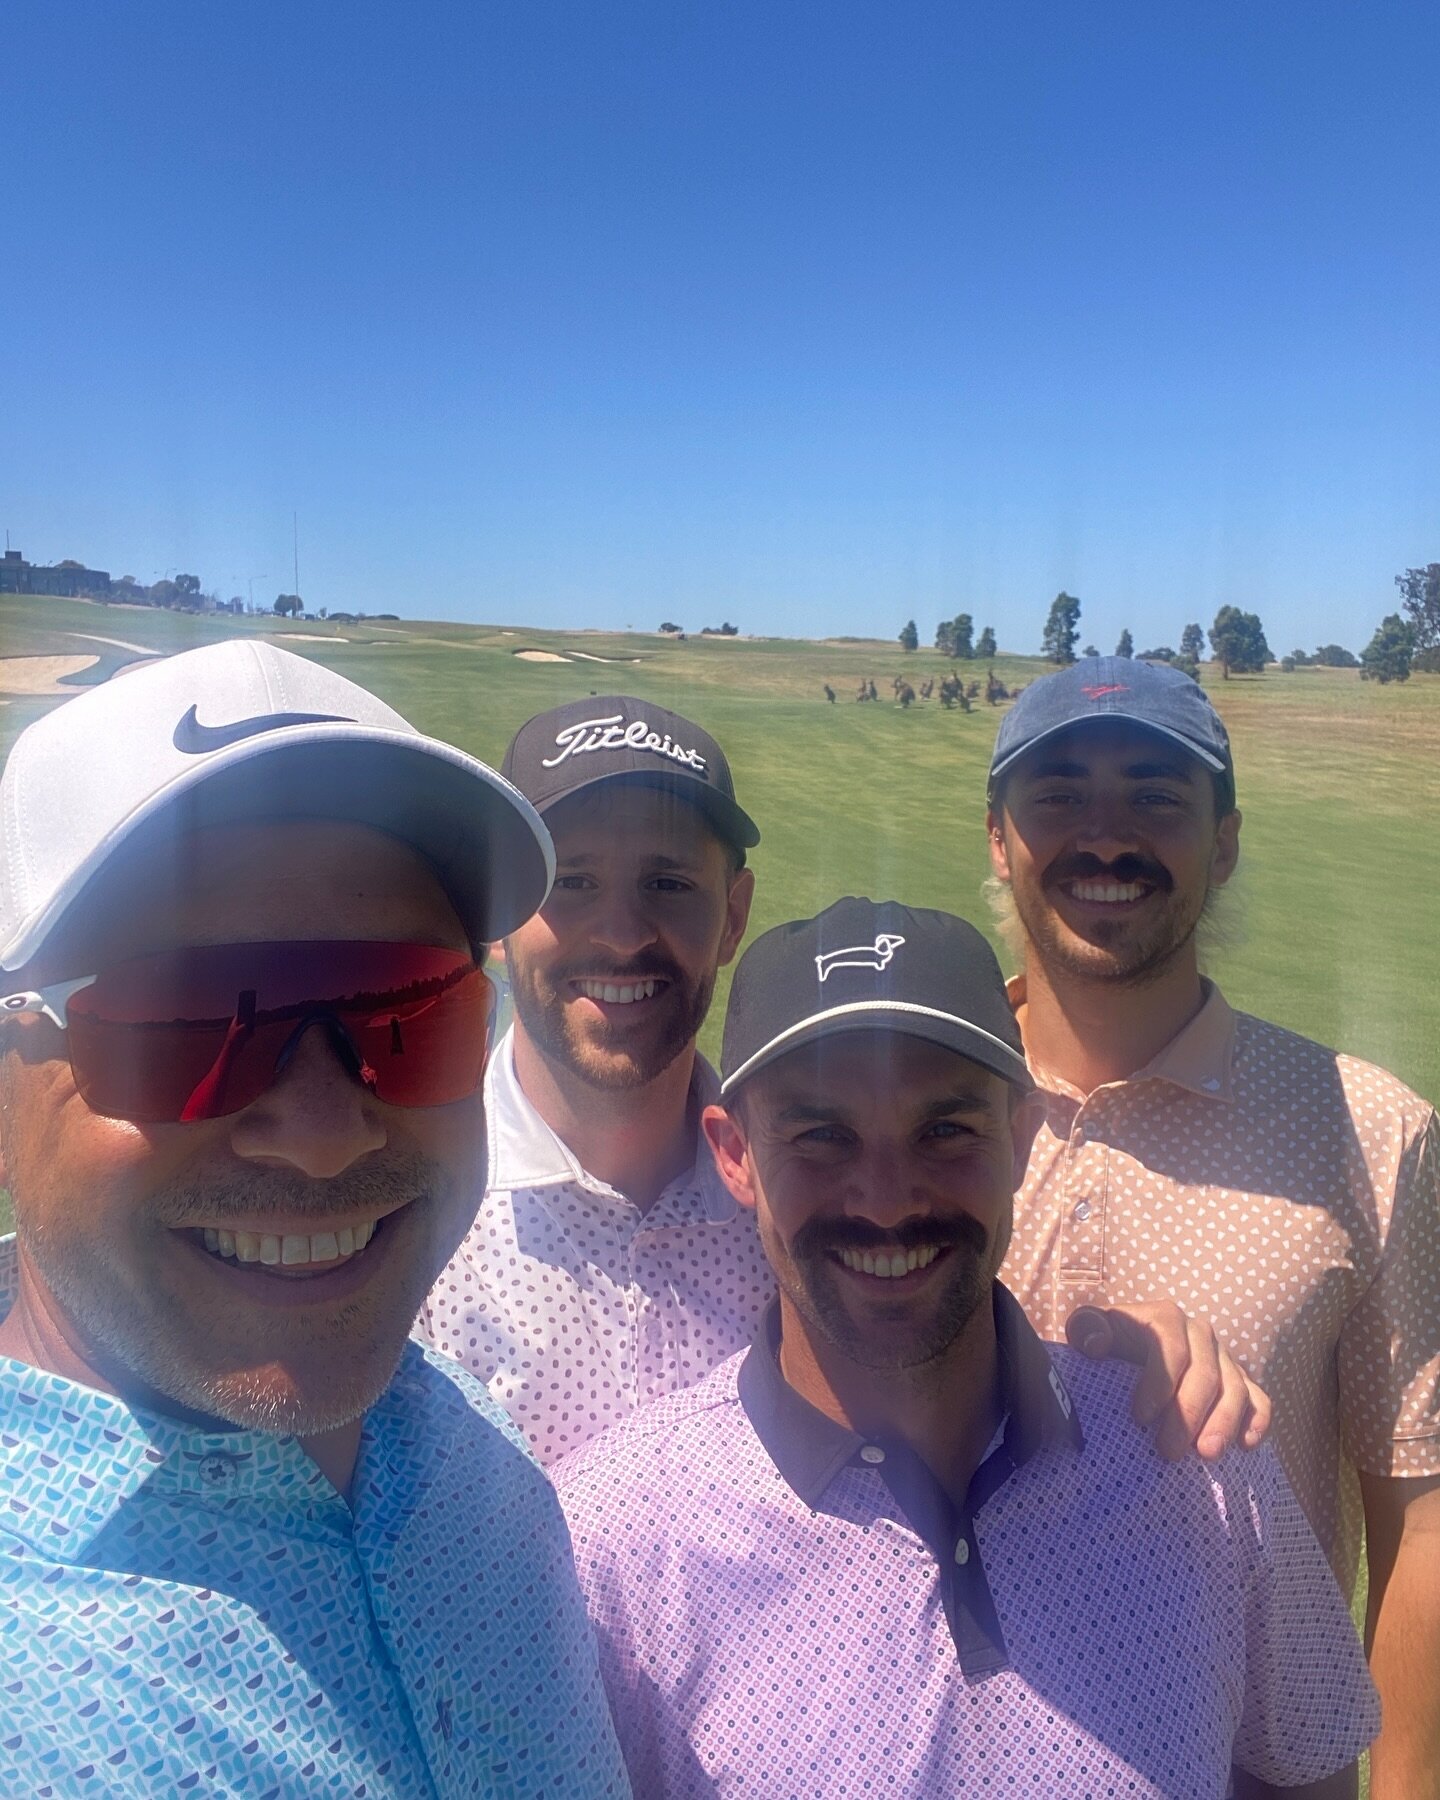 &ldquo;Rocking the bright shirt 👕 vibes on the course today! 

Spent a sunny day at @growlingfroggolf with good company, catching up with old client turned golf buddy @daveanta aka @halfcafgolf. Despite the patchy golf and windy conditions, the chal